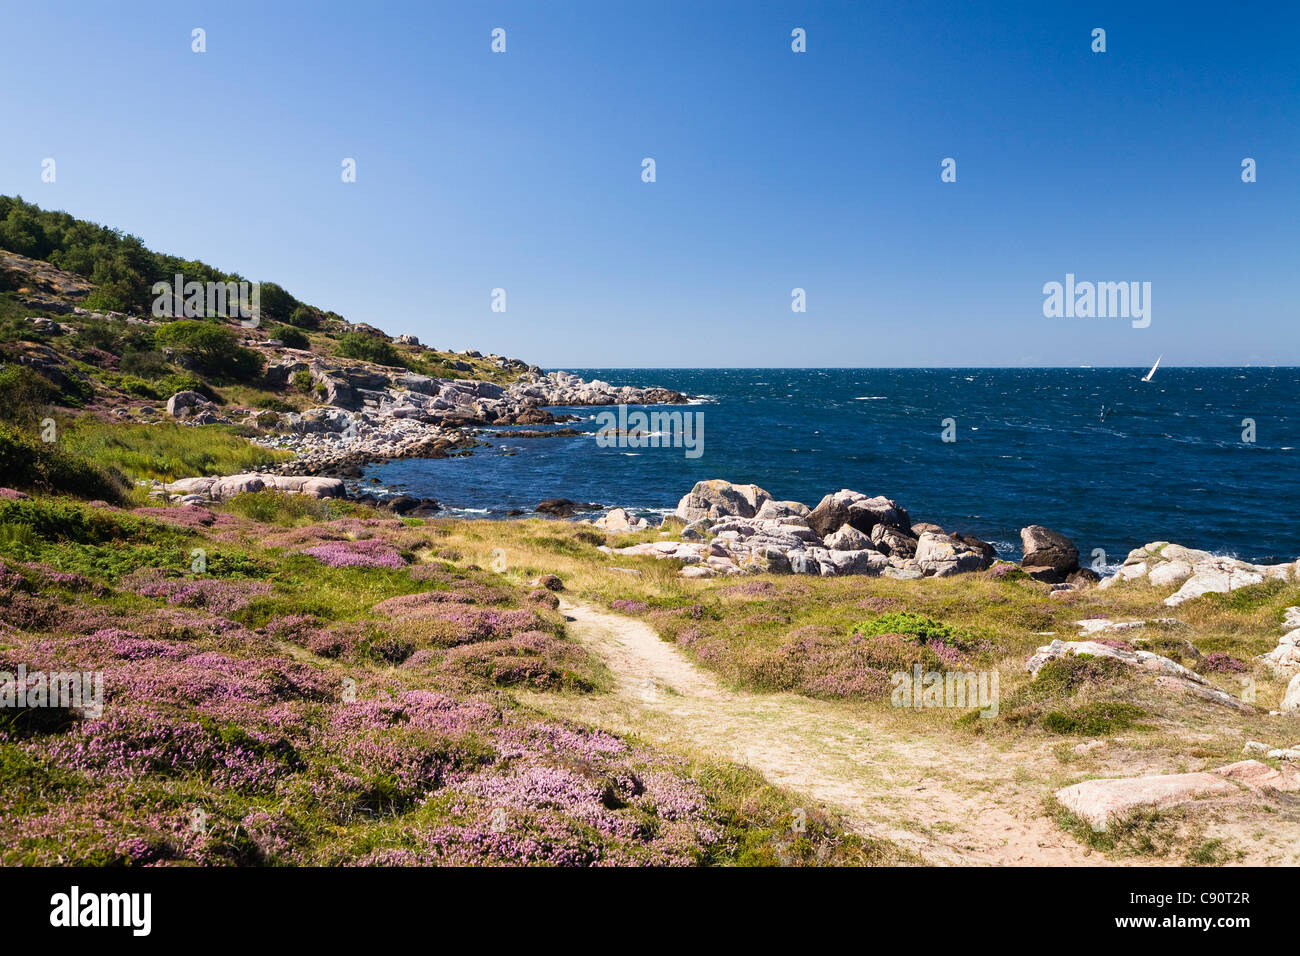 Hiking trail in coastal landscape at Hammer Odde with blooming heather, Hammeren, northern tip of Bornholm, Denmark, Europe Stock Photo